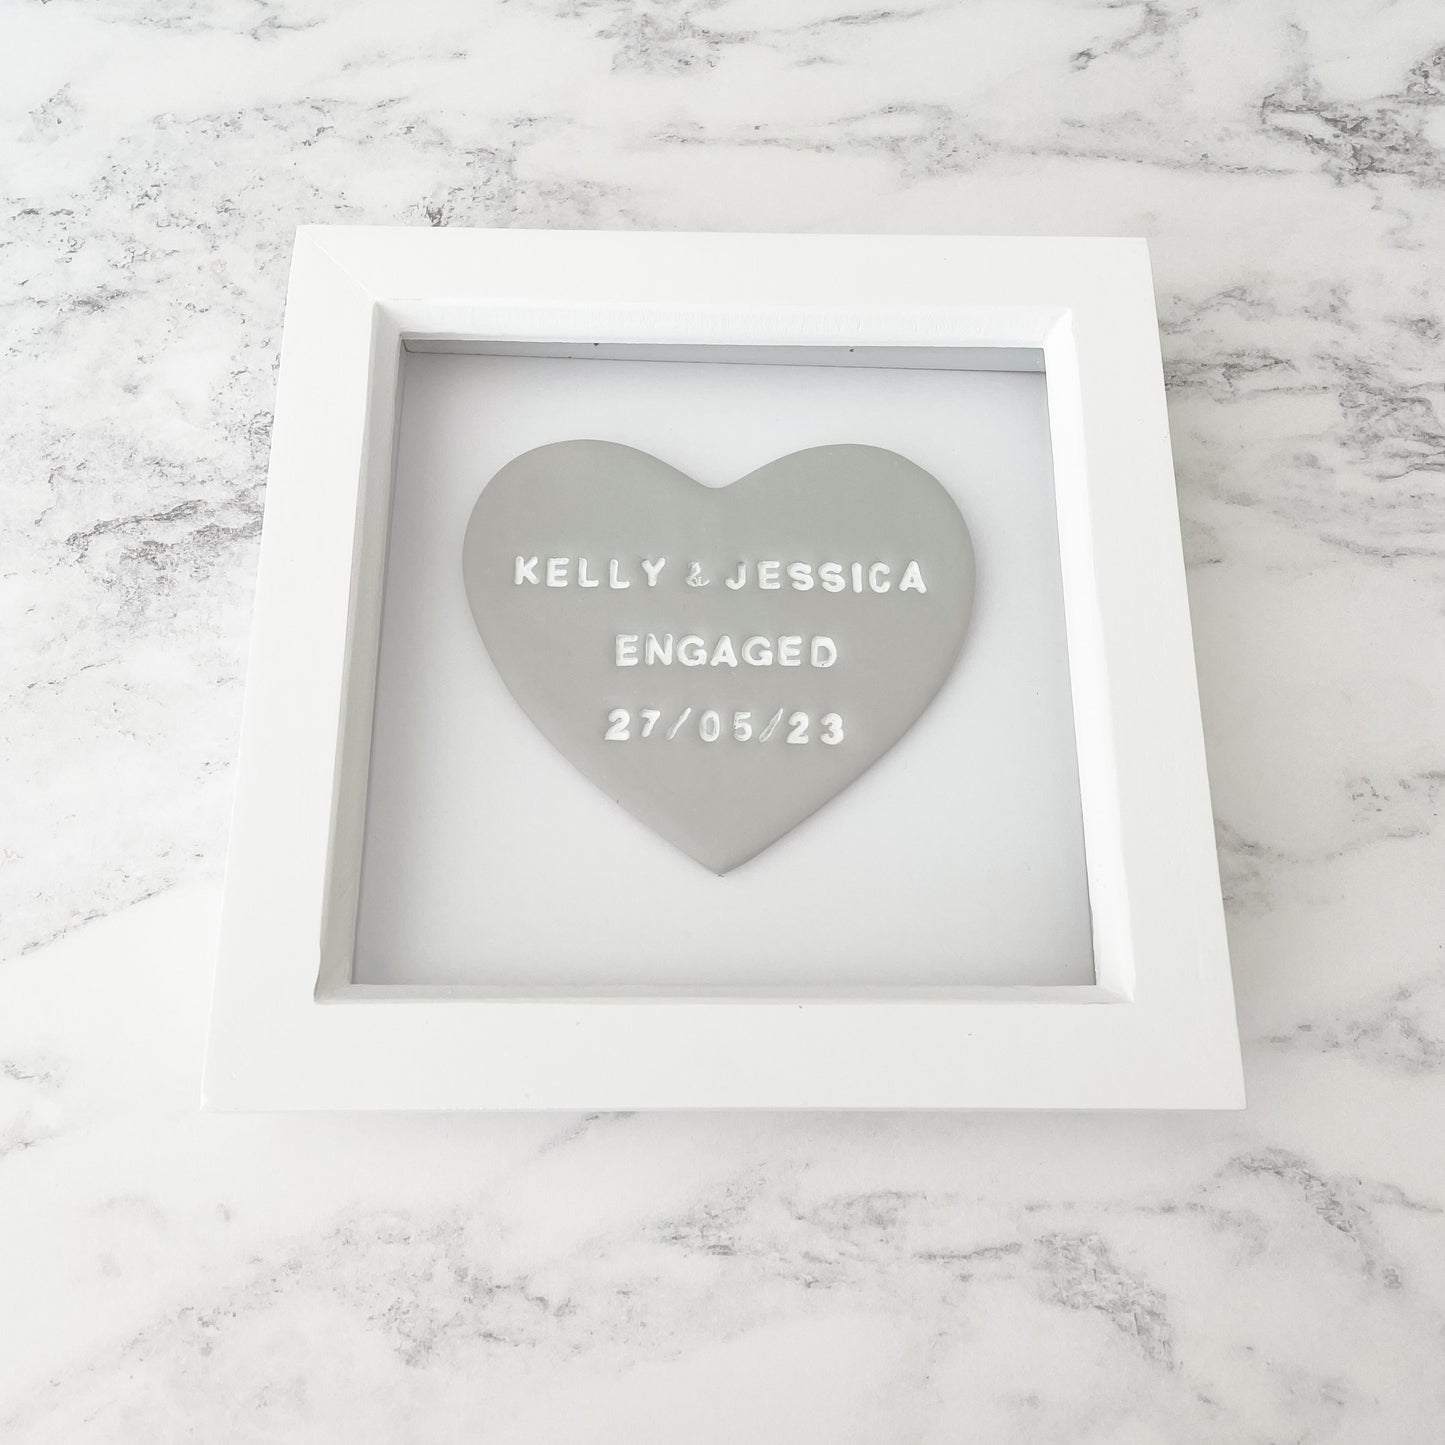 Personalised framed engagement gift, grey clay heart in a white box frame, the heart is personalised with KELLY & JESSICA ENGAGED 27/05/23